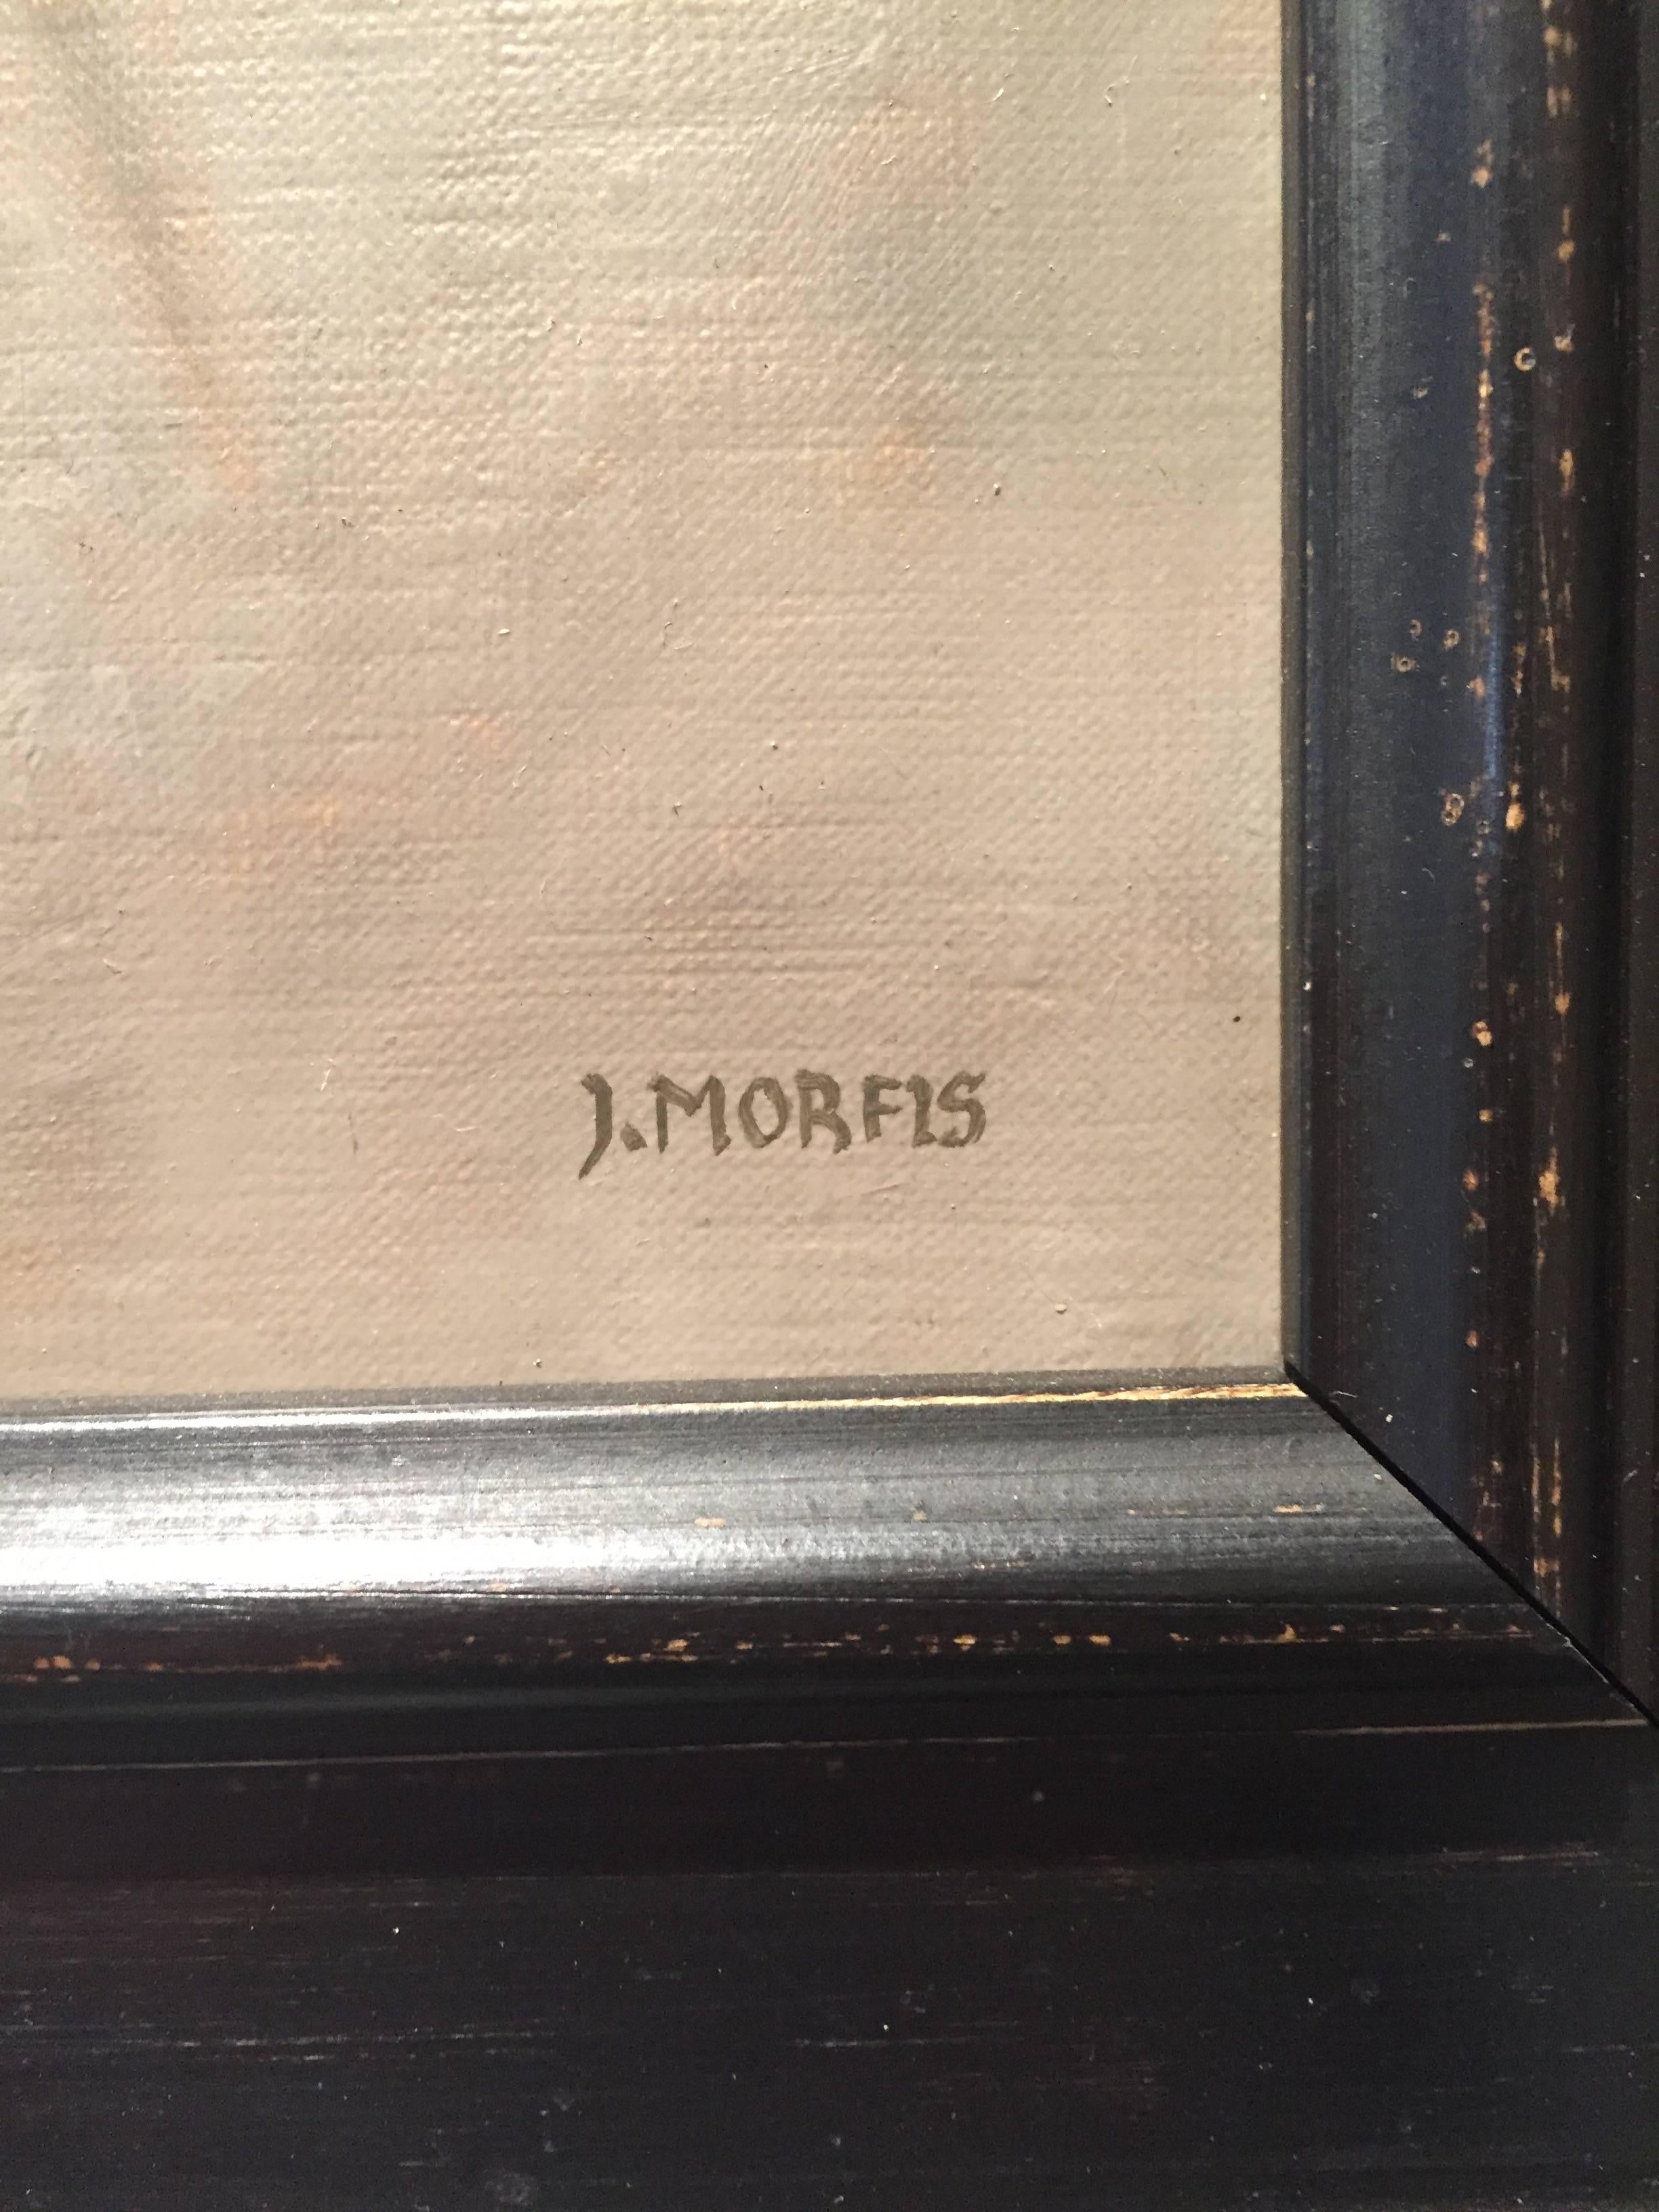 Painted from life, and architect's tool: a compass. Hanging from a tiny metal nail, painted in the style of Trompe L'Oeil.


John Morfis was born in Glen Cove, Long Island in 1976. His humble beginnings made pursuing a career in art difficult and